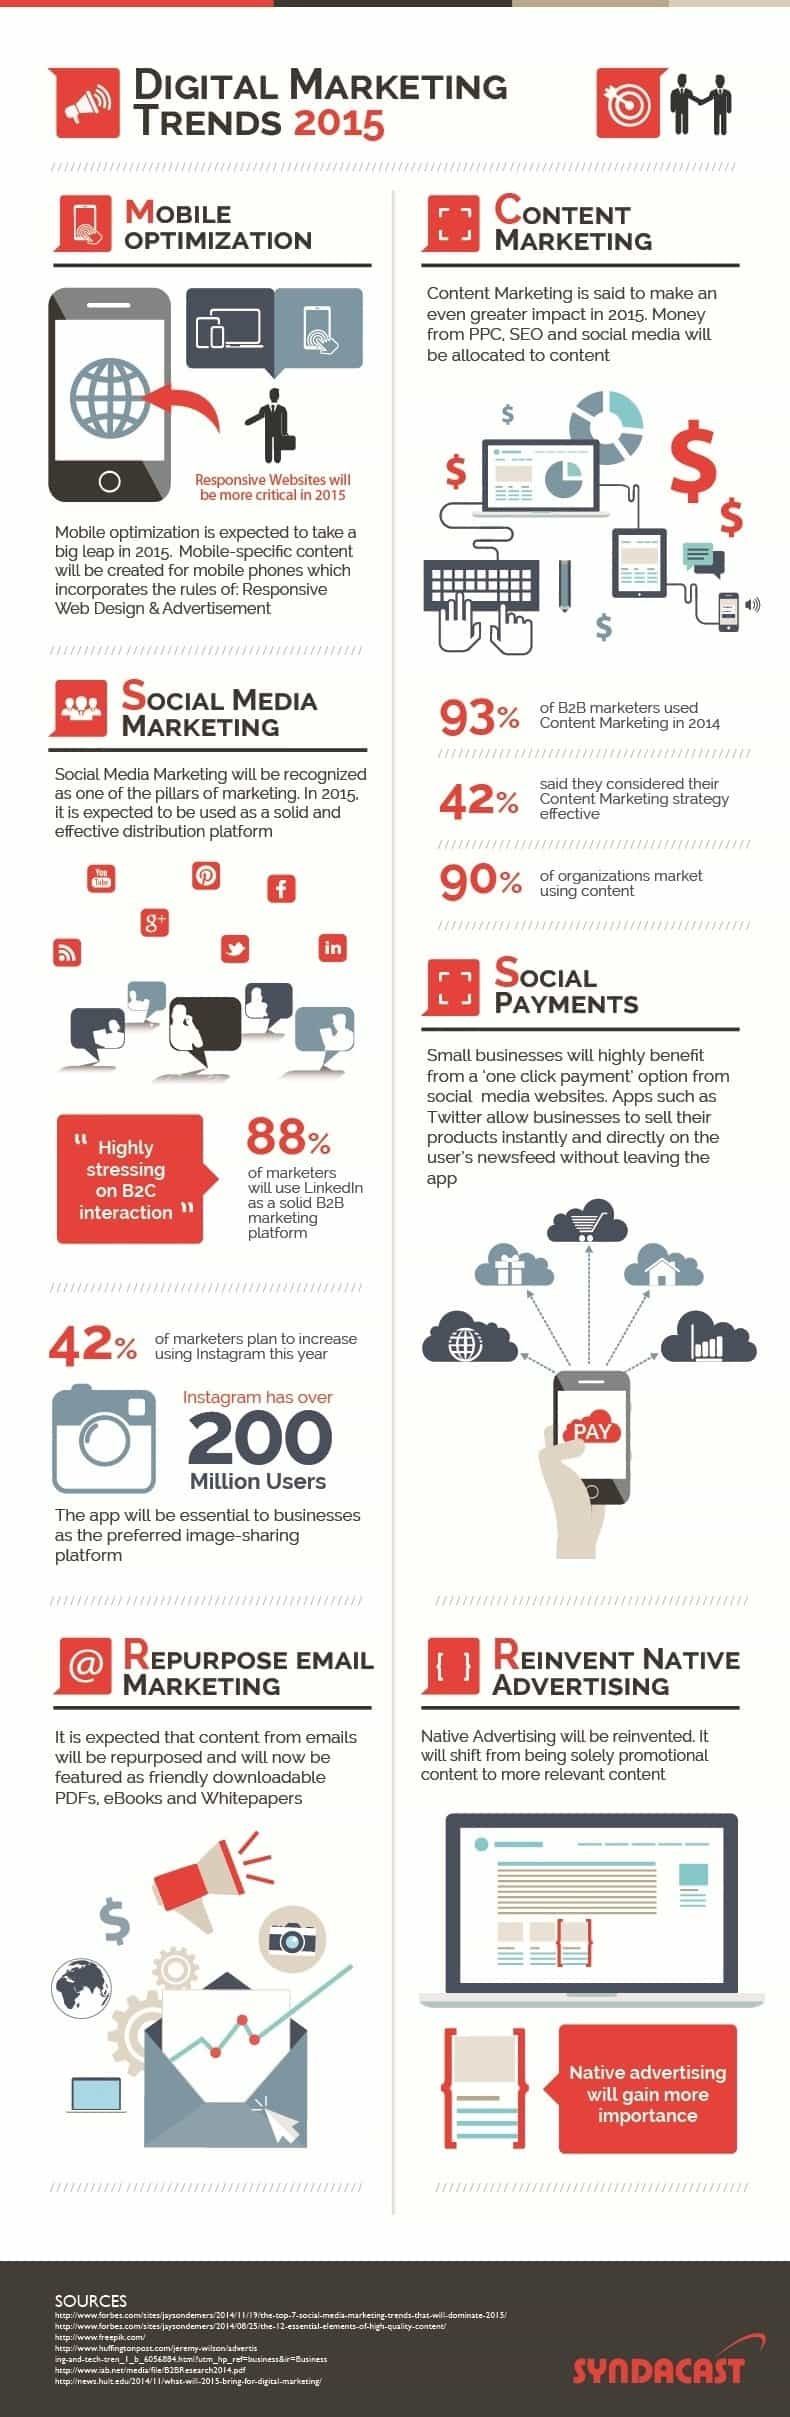 Mobile, Social, Content, Email: Digital Marketing Trends And Prediction 2015 &#8211; #infographic